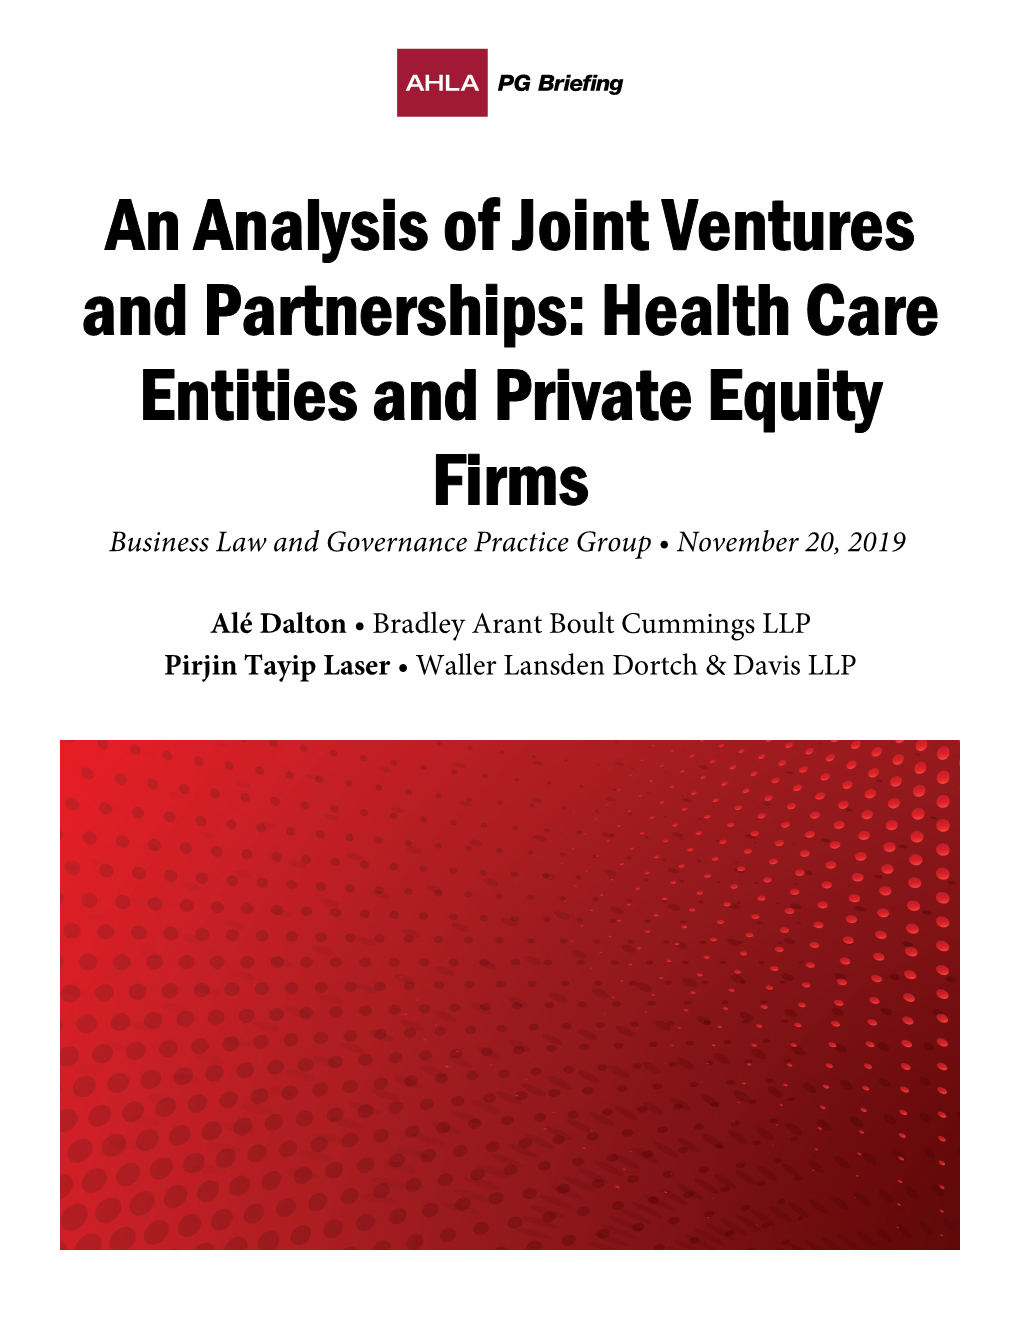 An Analysis of Joint Ventures and Partnerships: Health Care Entities and Private Equity Firms Business Law and Governance Practice Group • November 20, 2019